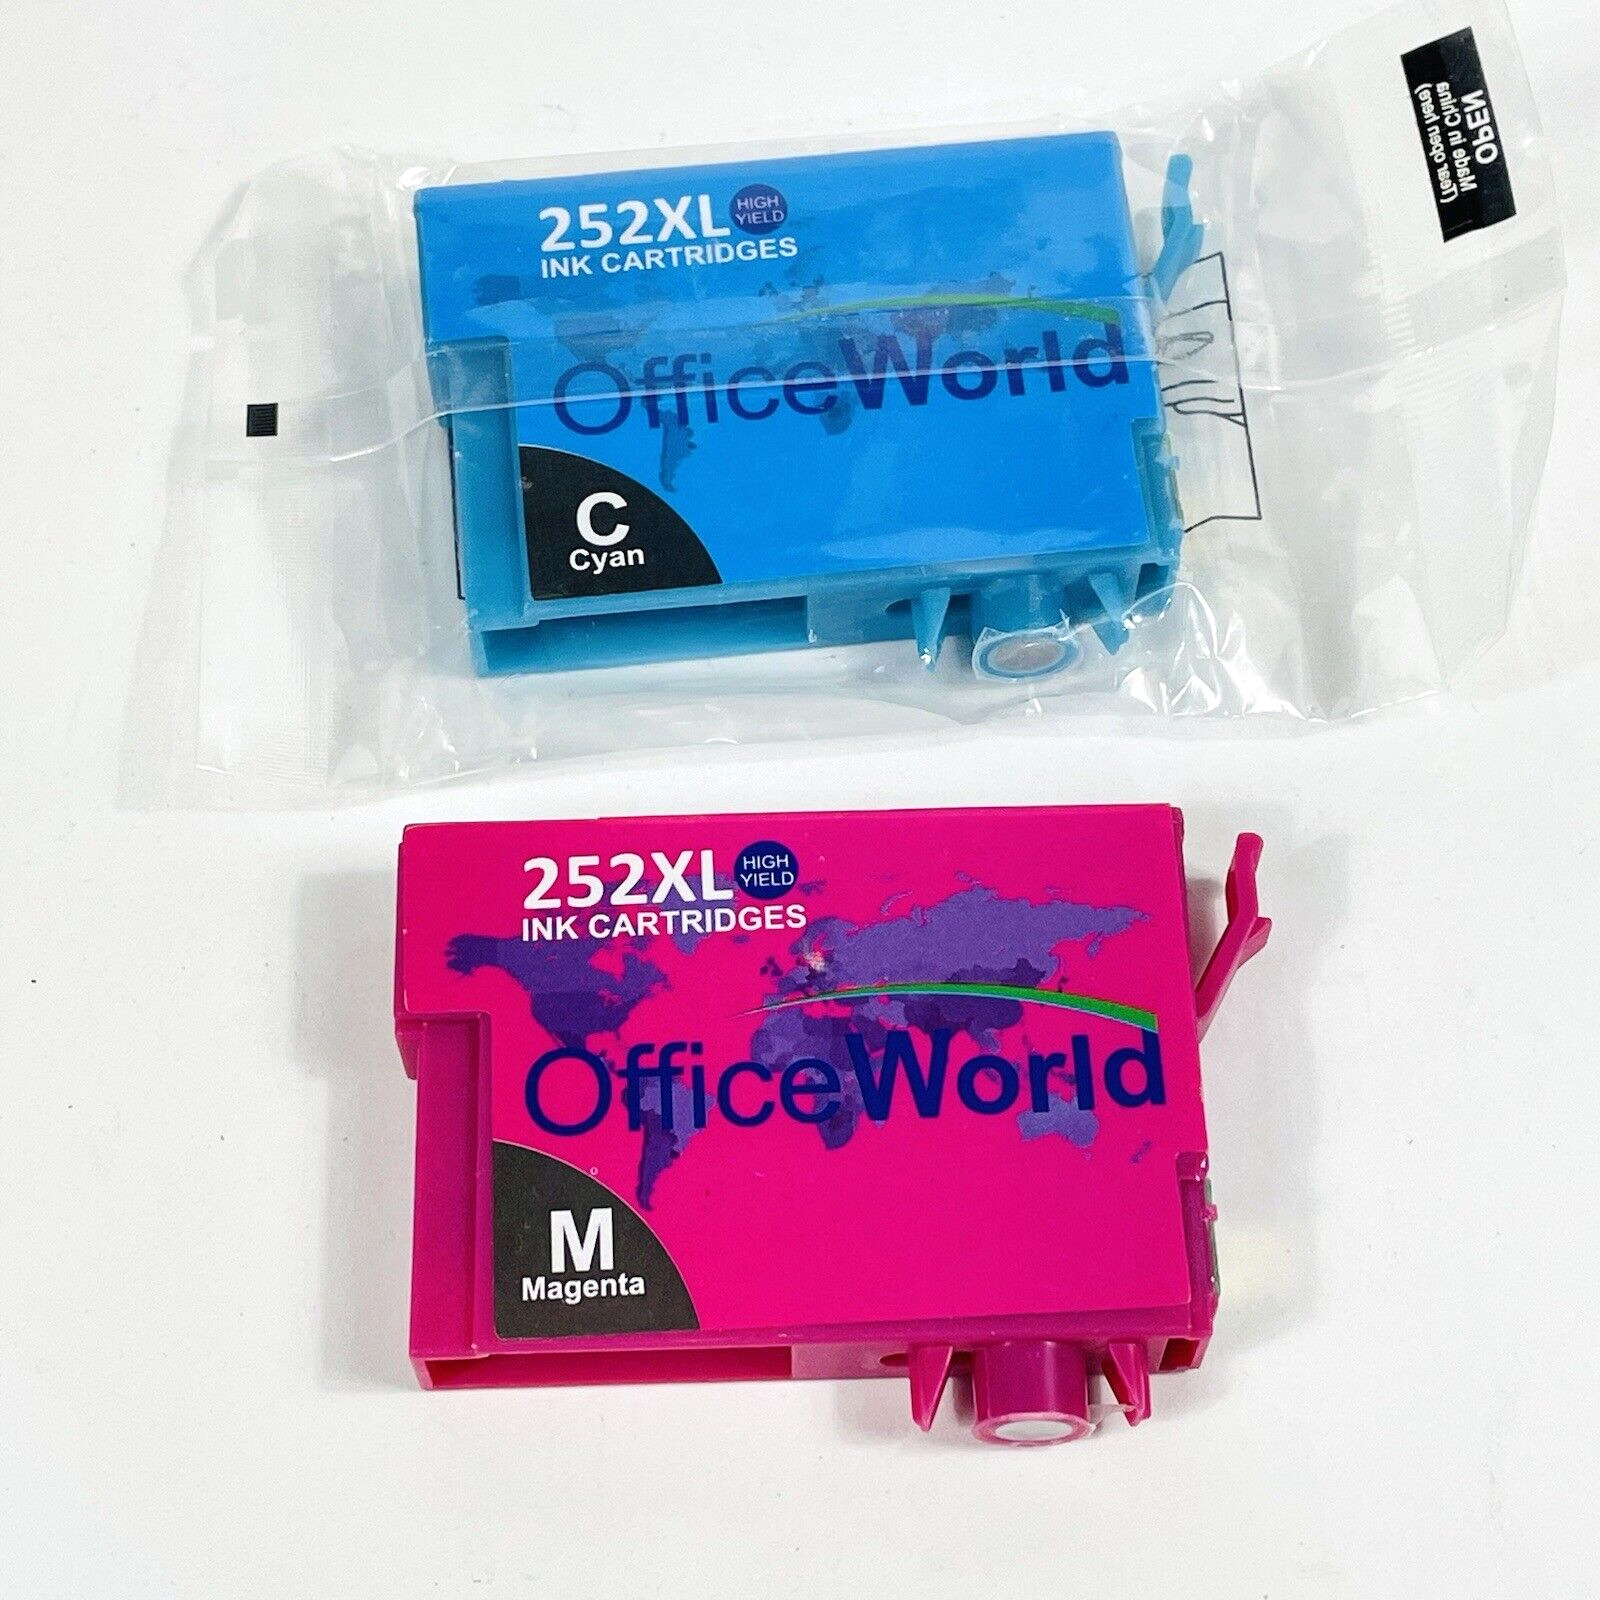 Office World ink cartridges 252XL Magenta and Cyan